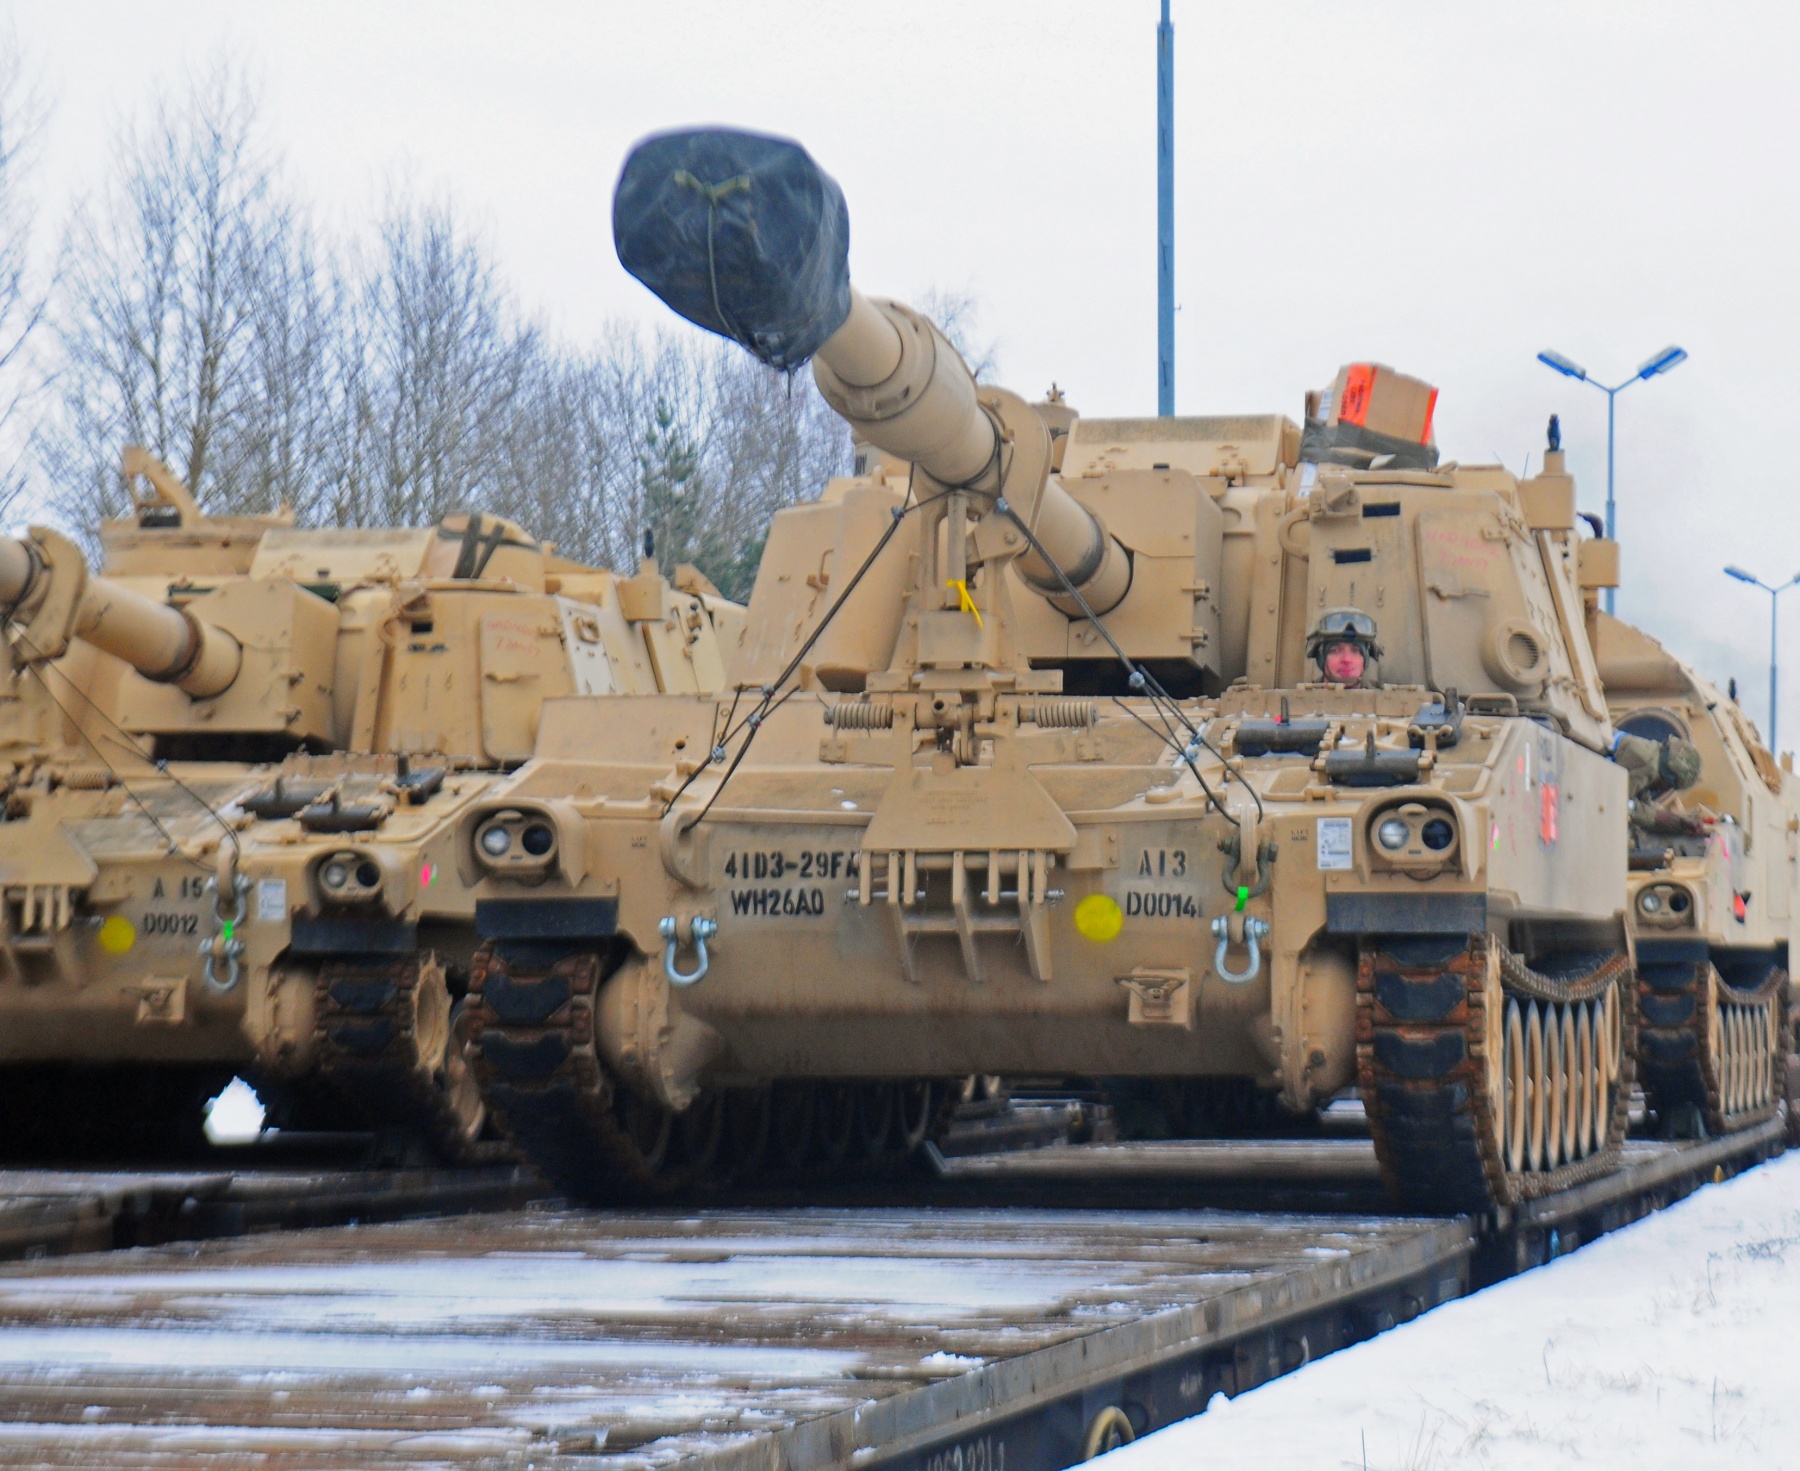 An American soldier from 3rd Battalion, 29th Field Artillery Regiment, 3rd Armored Brigade Combat Team, 4th Infantry Division, drives a M109 Paladin self-propelled howitzer off of a flatcar in Drawsko Pomorskie, Poland, Jan. 9, 2017. The howitzer was one of 53 vehicles that arrived in Northeastern Poland from the Port of Bremerhaven, Germany, as part of Operation Atlantic Resolve. Rotating units through the European theater enhances U.S. European Command’s ability to deter aggression and assure U.S. allies. Army photo by Staff Sgt. Corinna Baltos. -